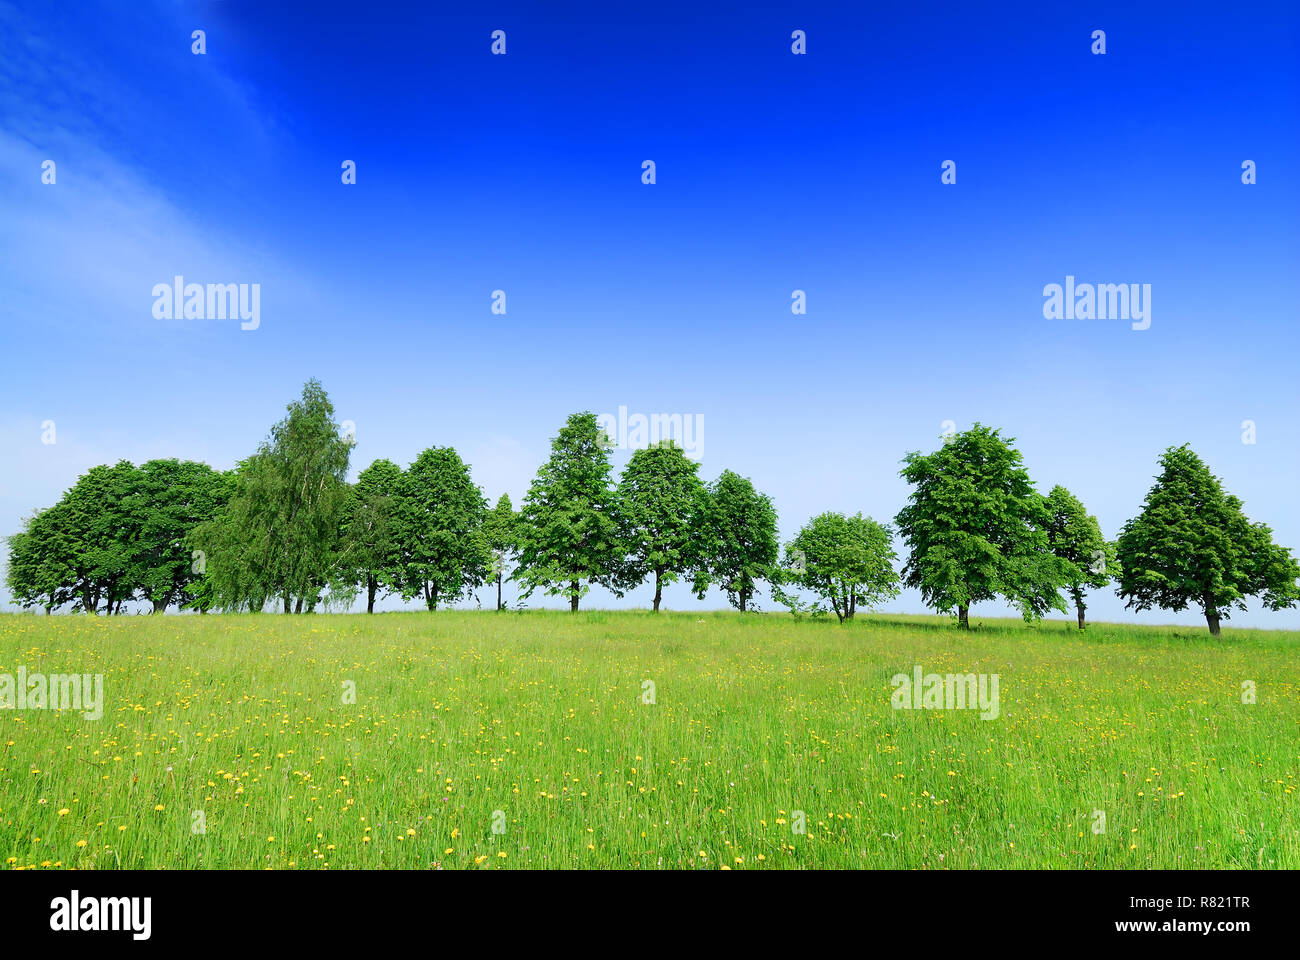 Landscape, row of trees among green fields, blue sky in background Stock Photo